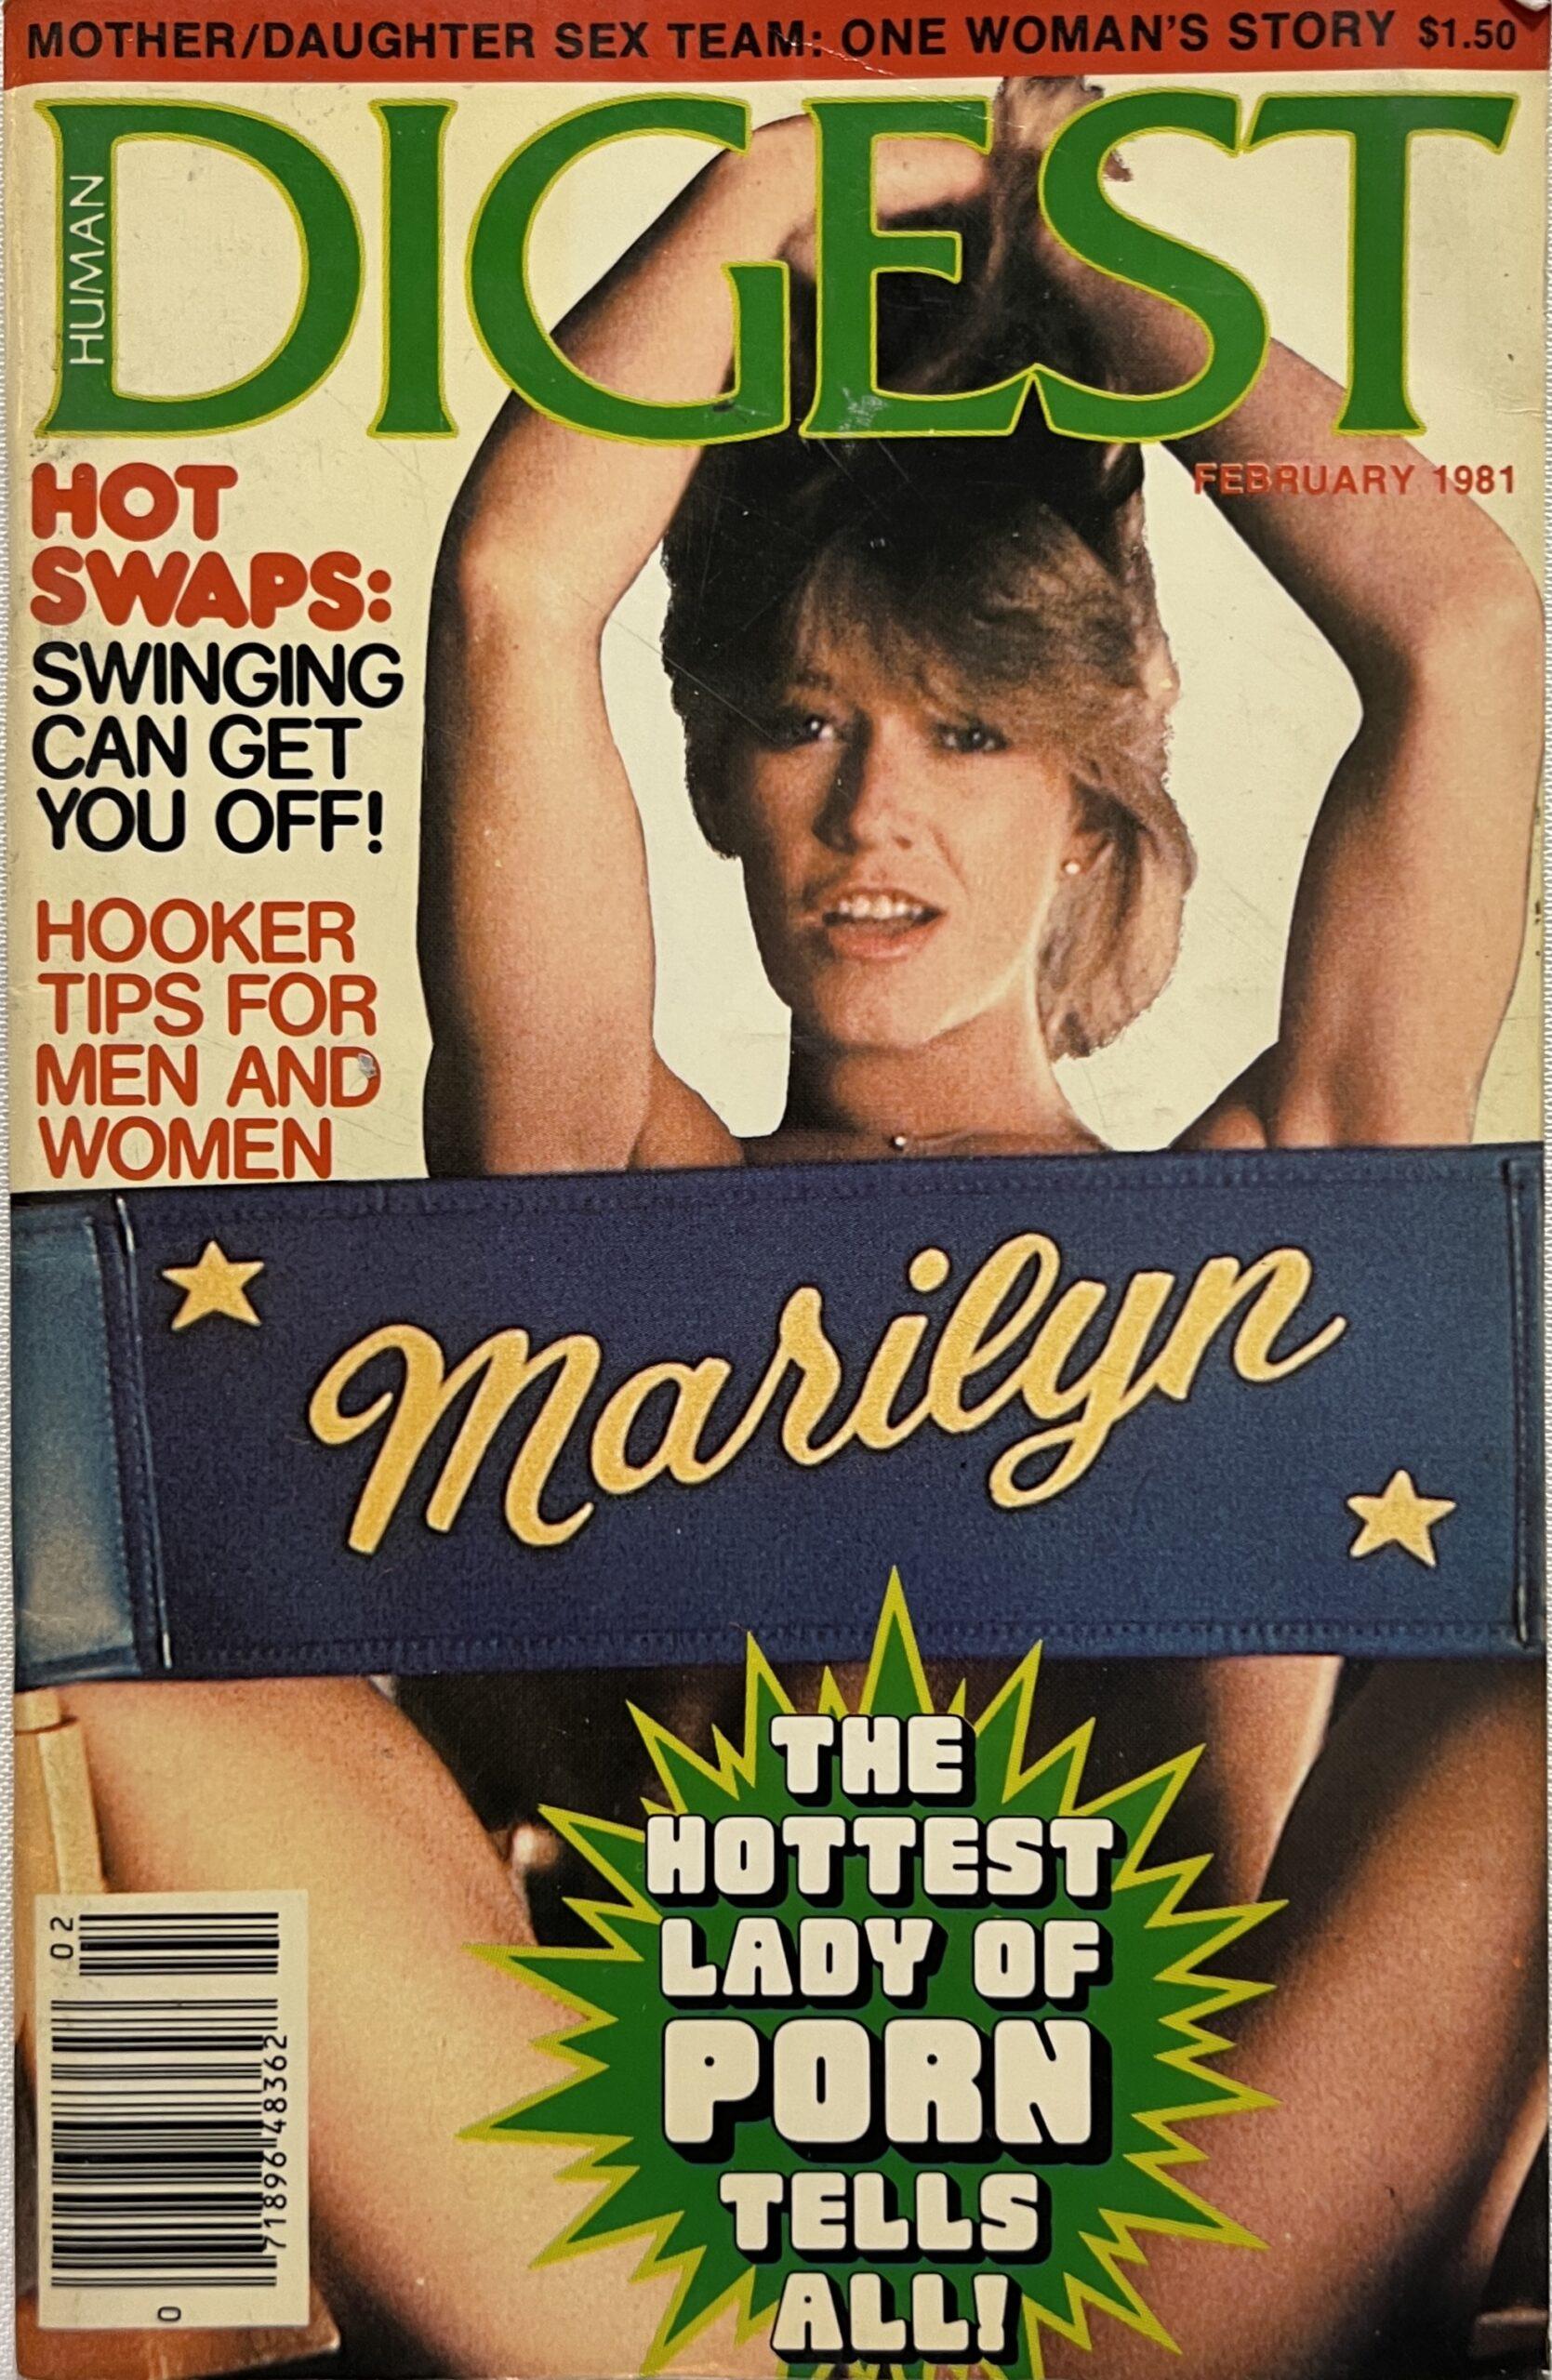 70s Porn Magazines Mother Daughter - Books Archives - Vintage Magazines 16